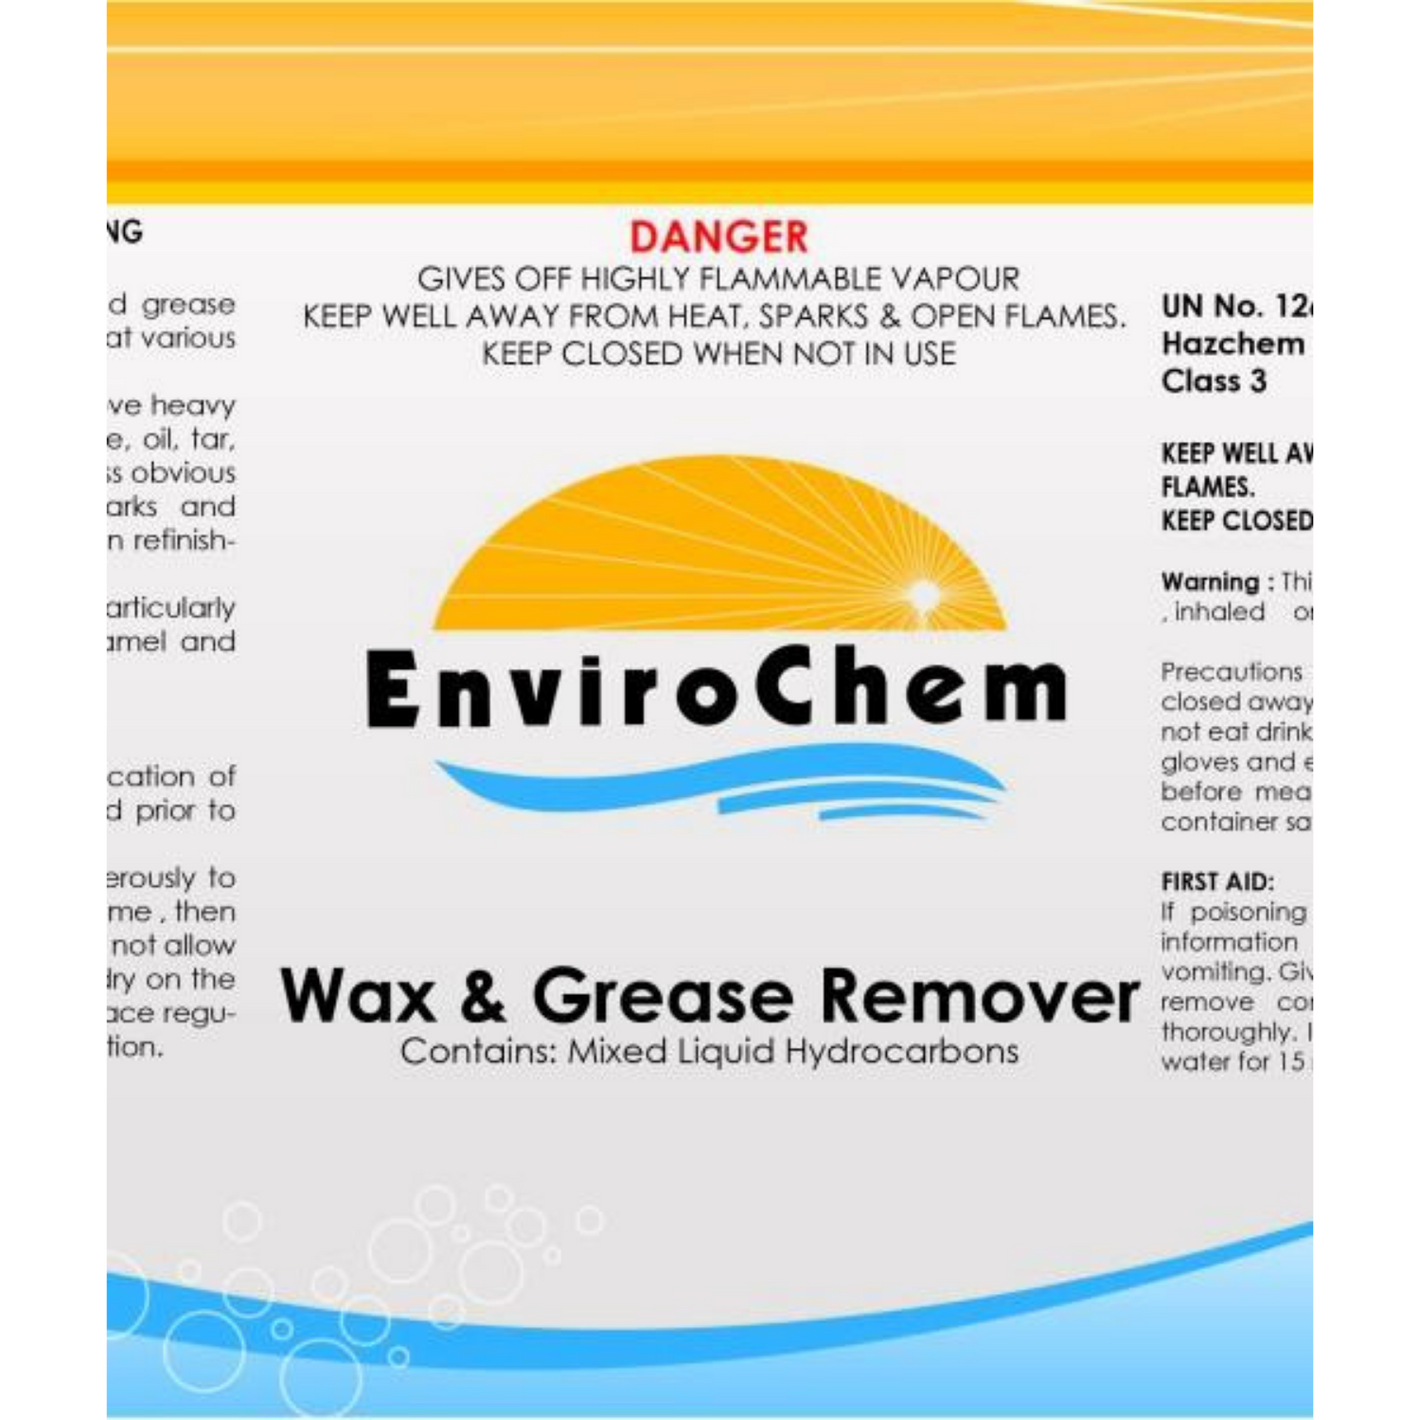 Wax-Grease-Remover-510x600_1024x1024_V